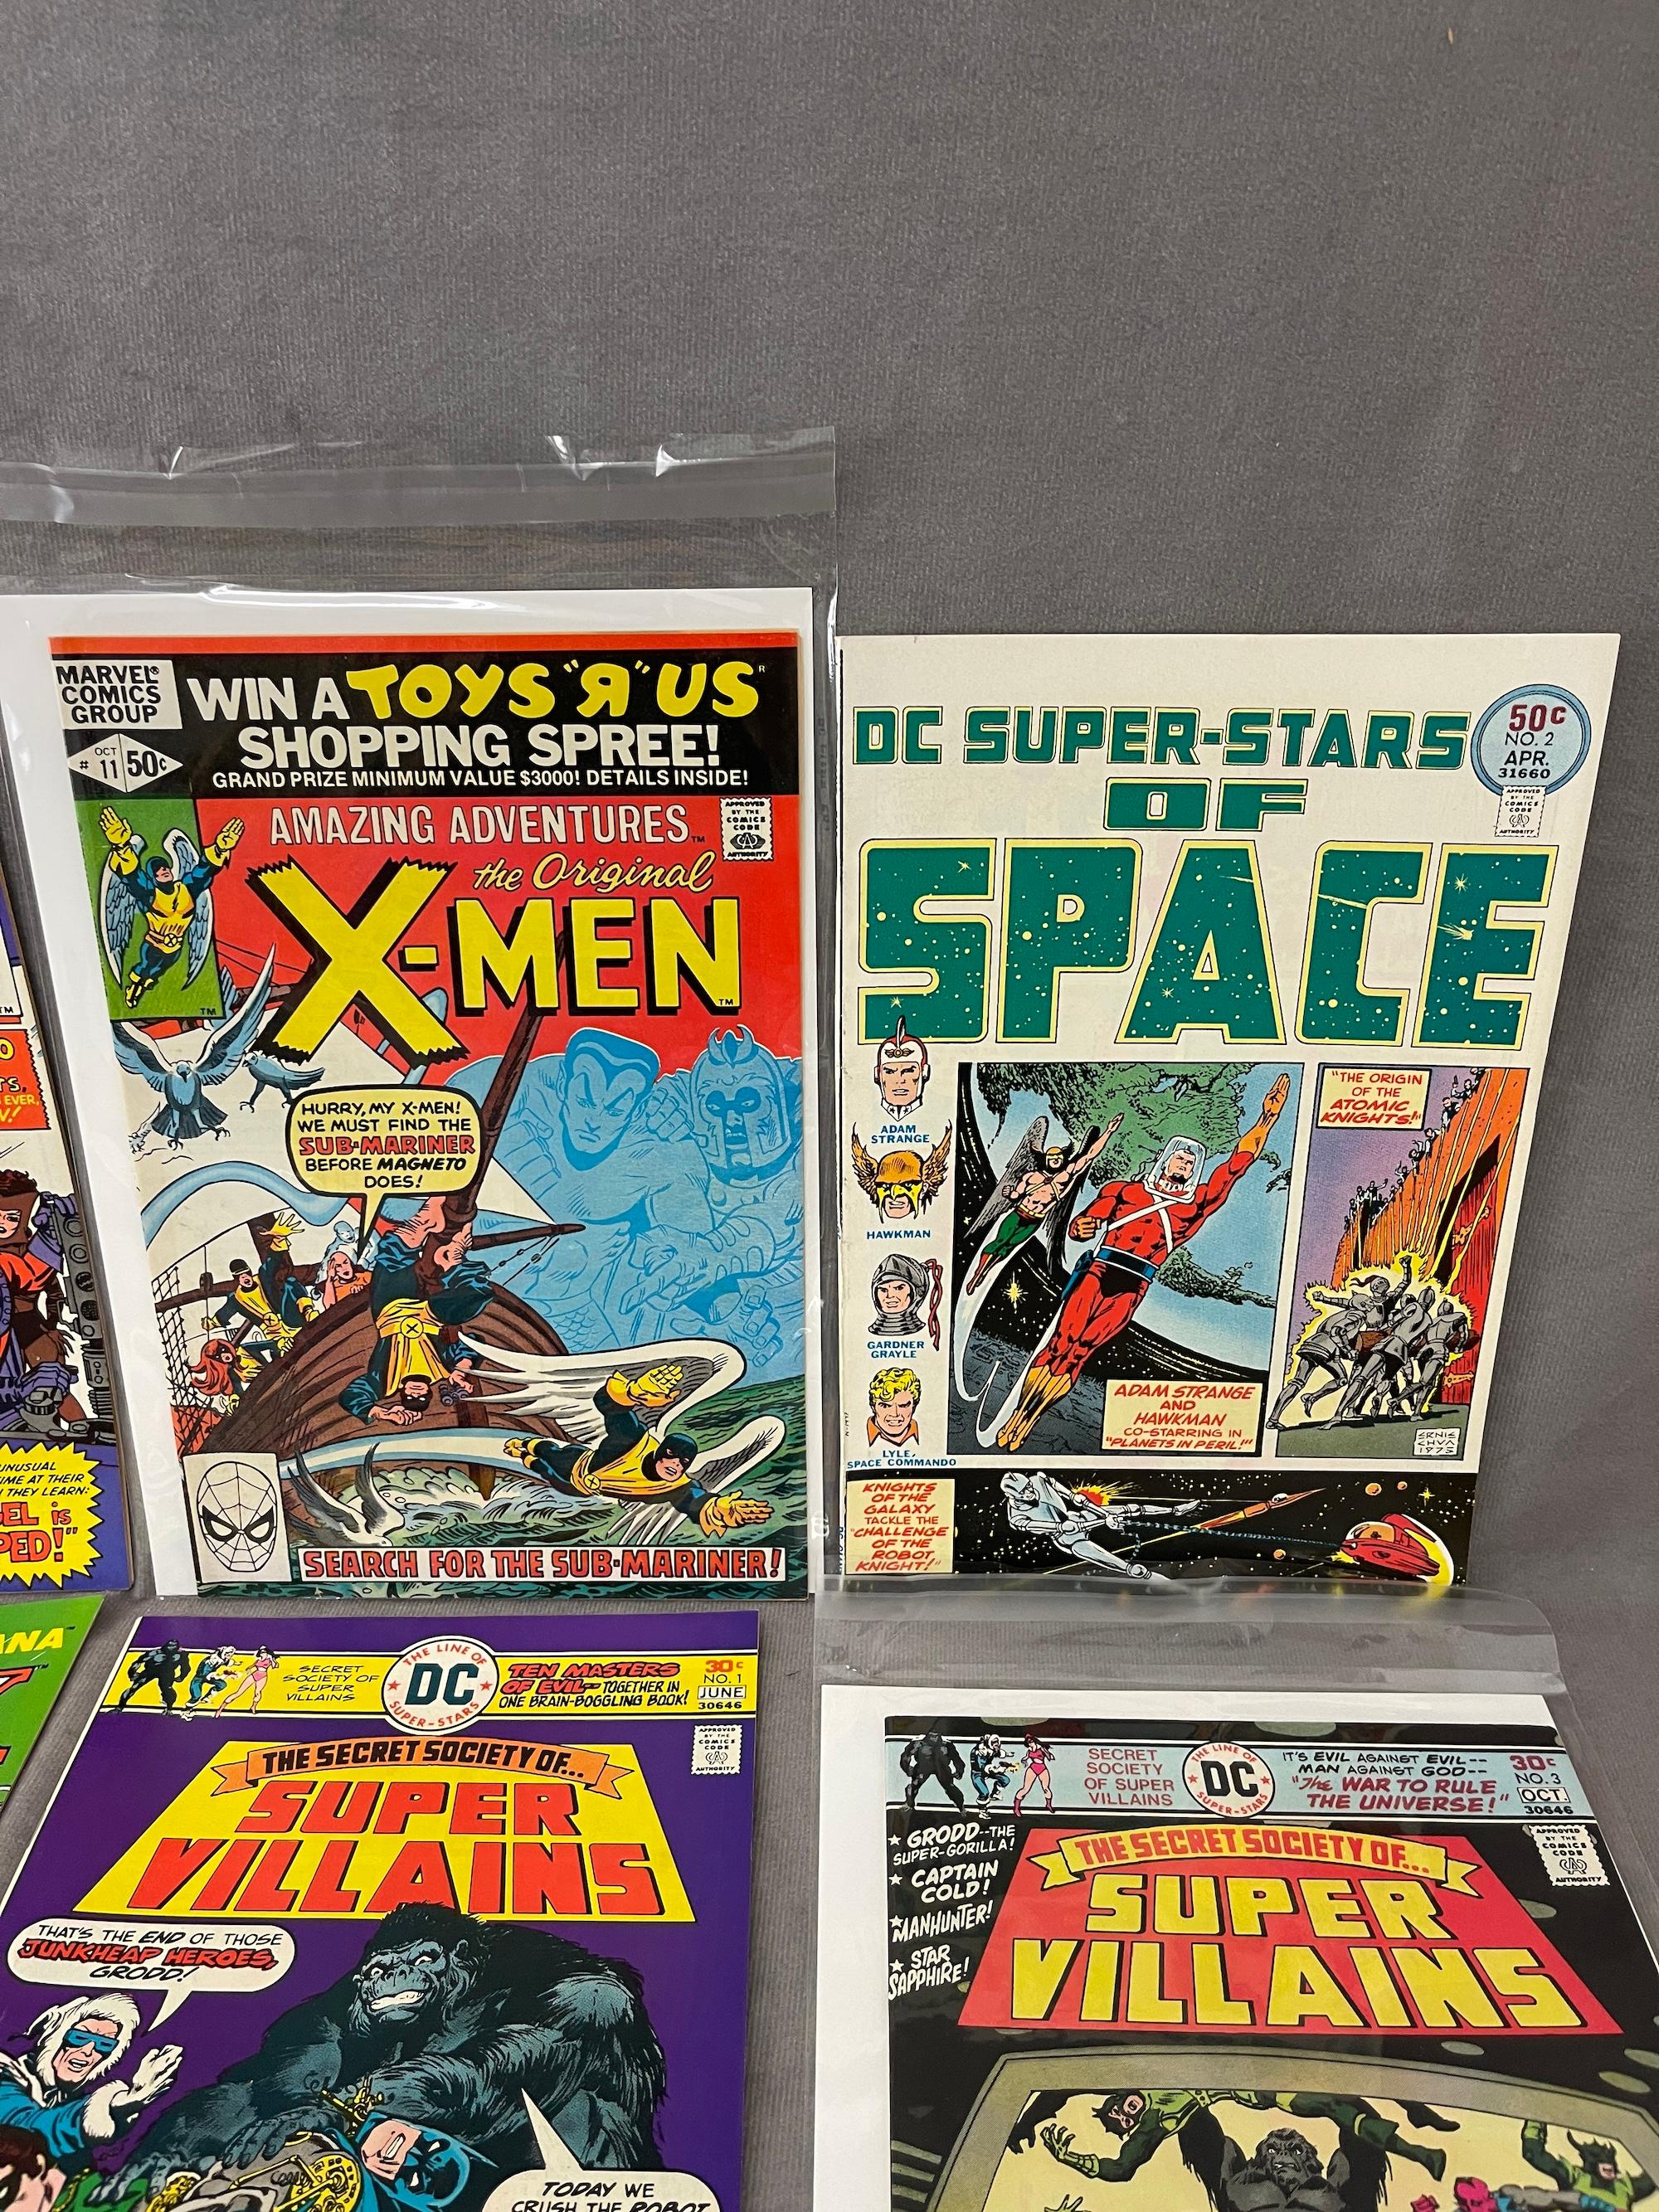 VINTAGE COMIC BOOK COLLECTION THING X-MEN LOT 8